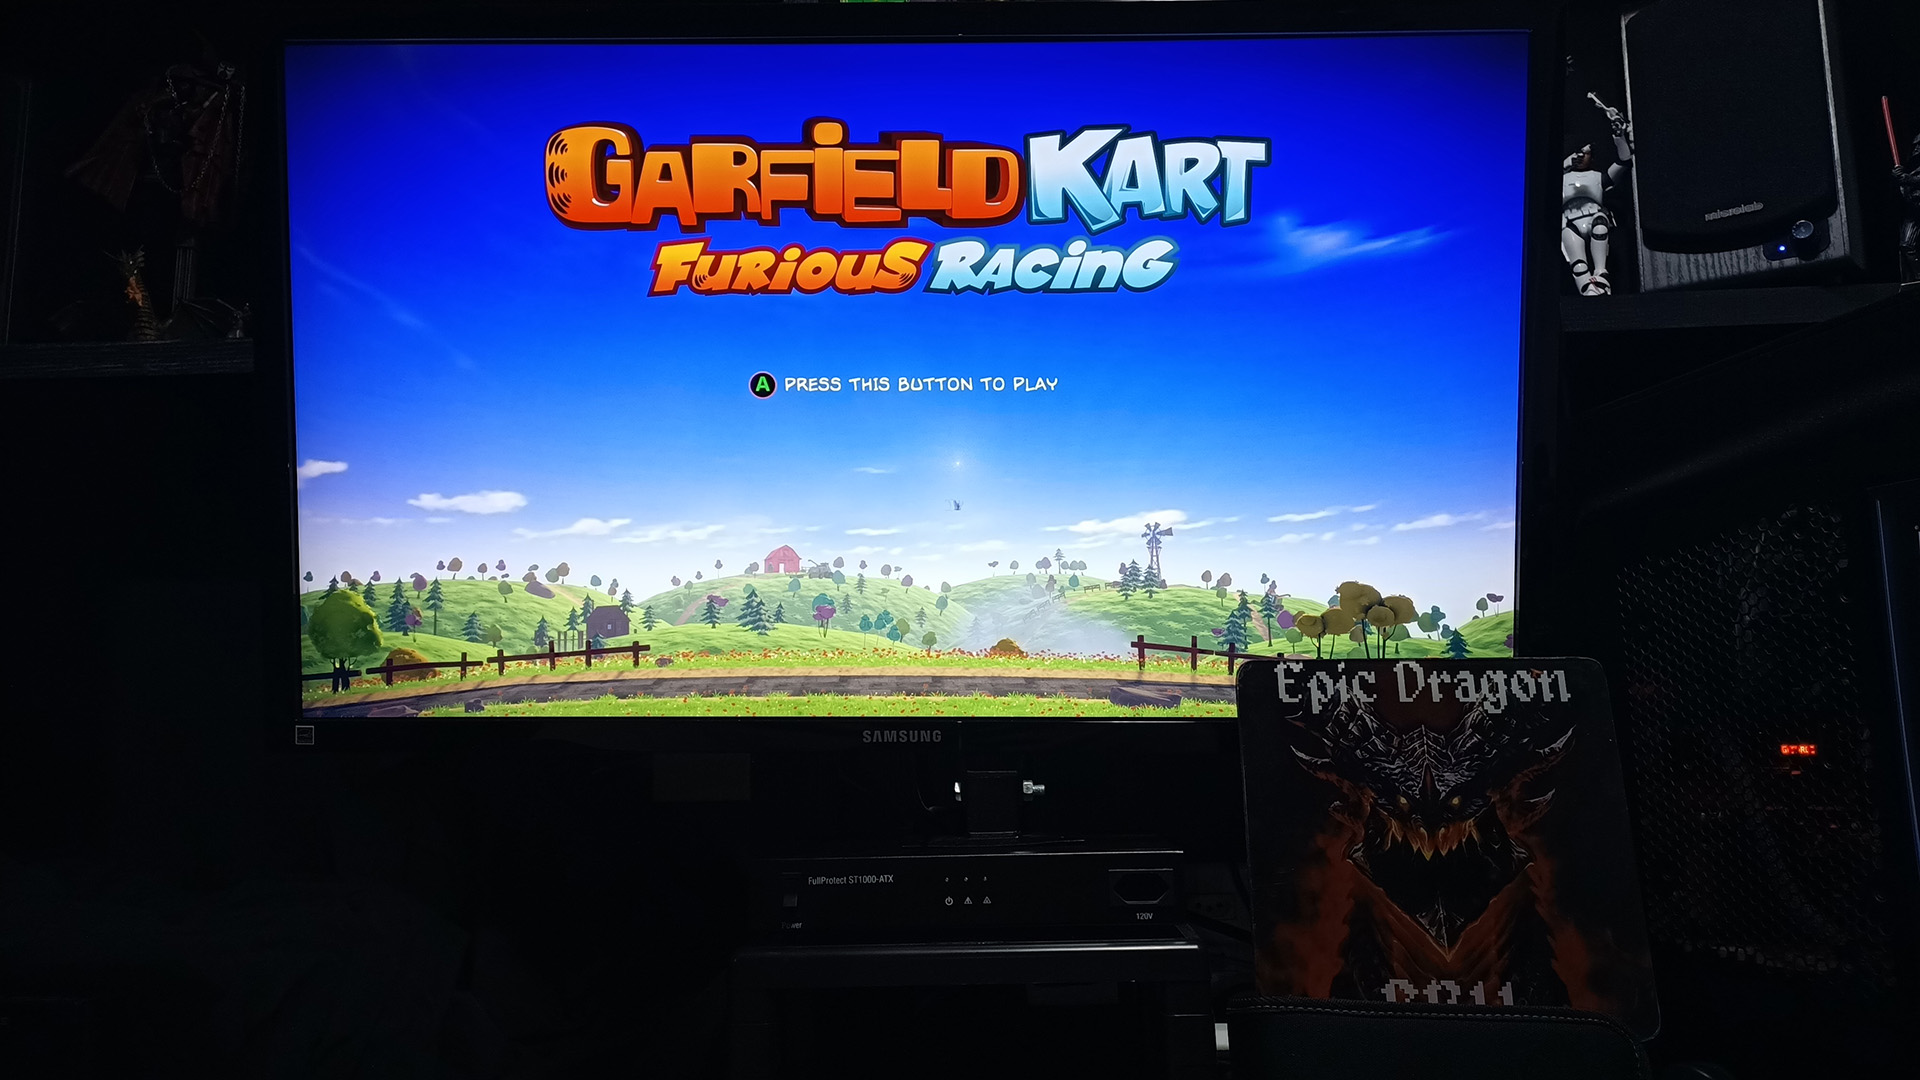 EpicDragon: Garfield Kart Furious Racing: Play Misty For Me [Time Trial: 3 Laps] (PC) 0:02:13.105 points on 2022-08-11 17:18:35